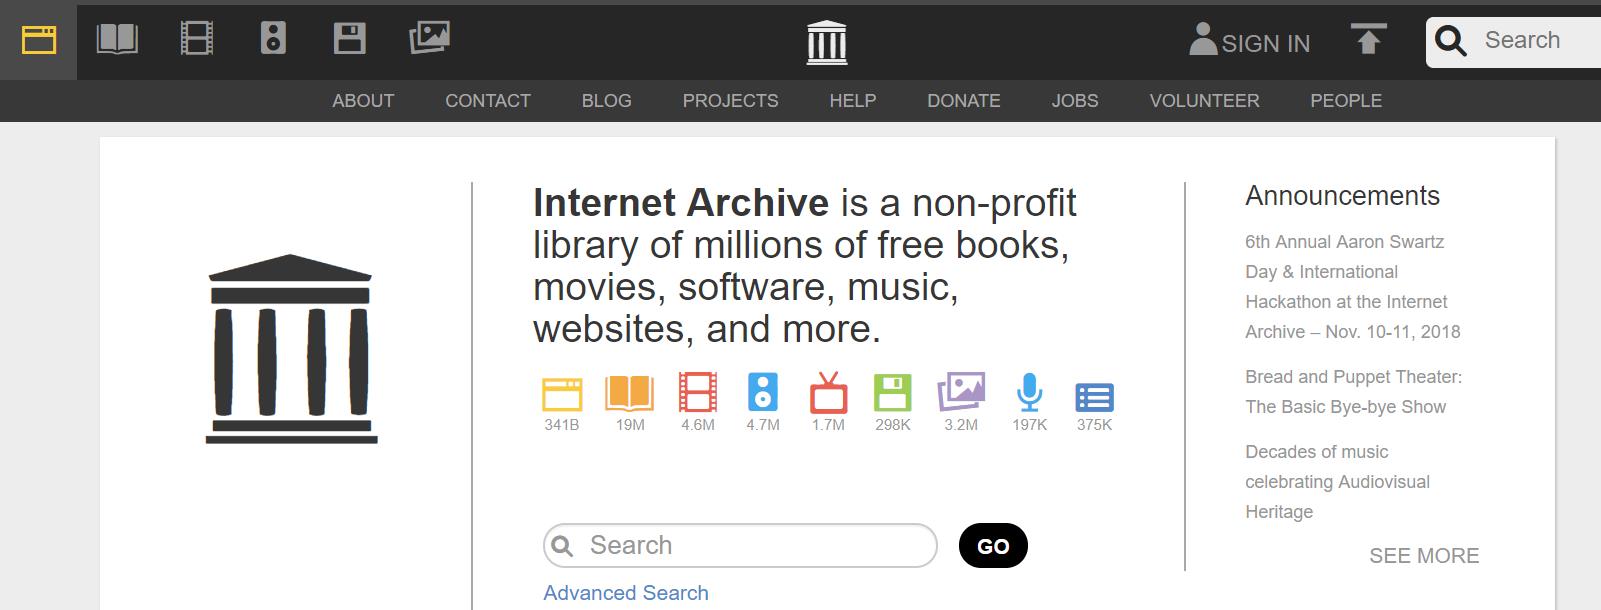 Internet Archive: A Gold Mine for Genealogists